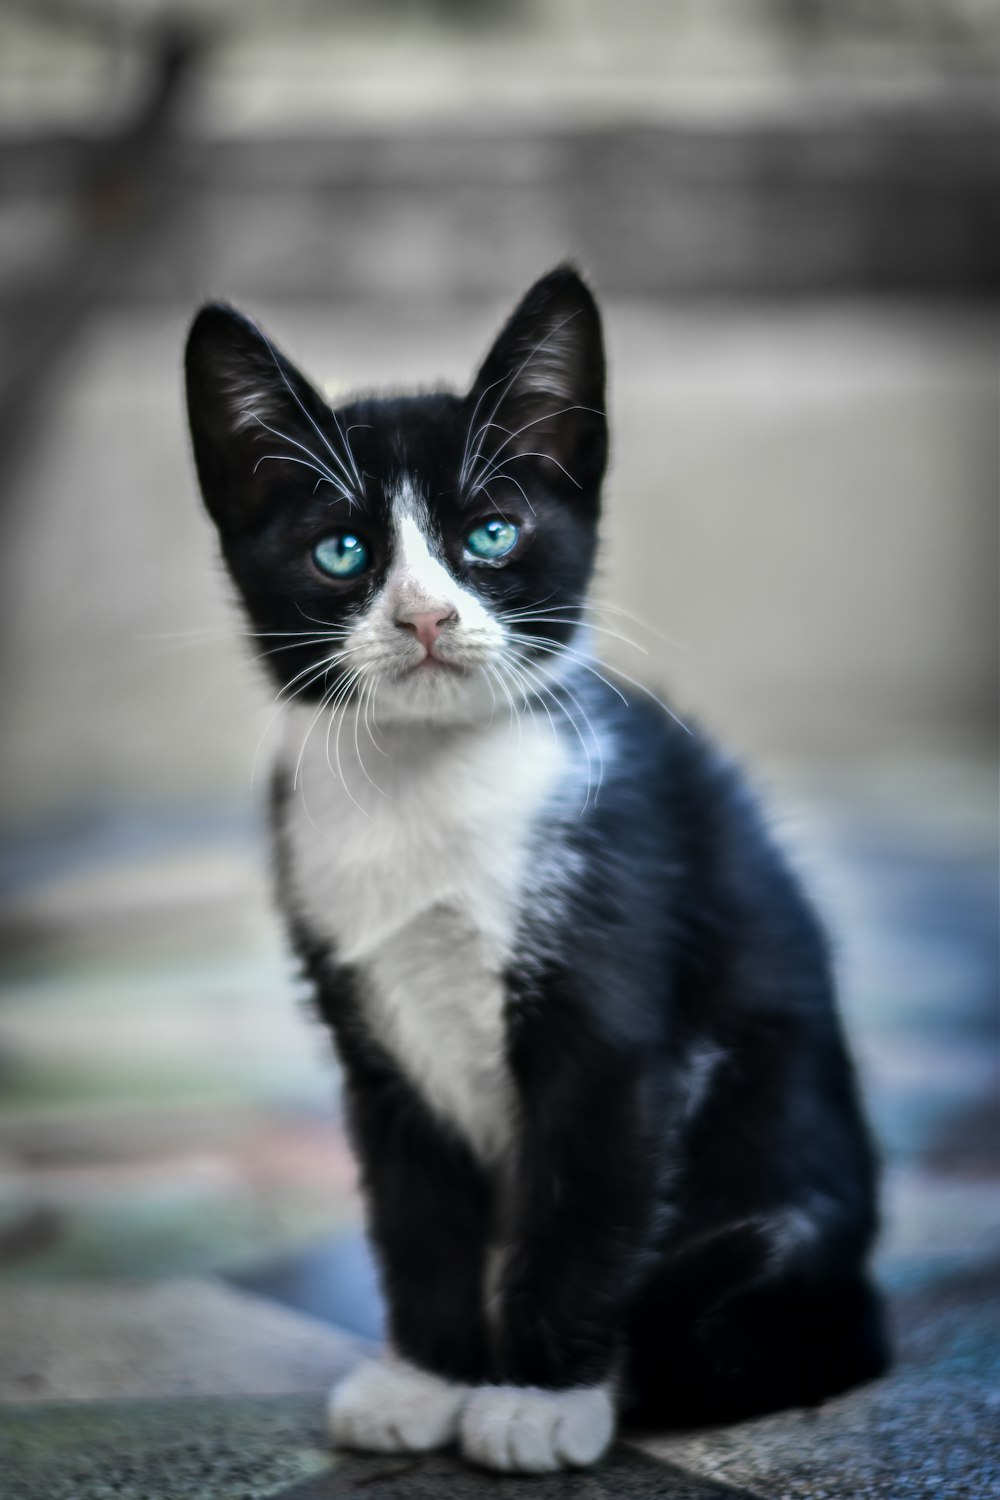 a black and white cat with blue eyes sitting on the ground